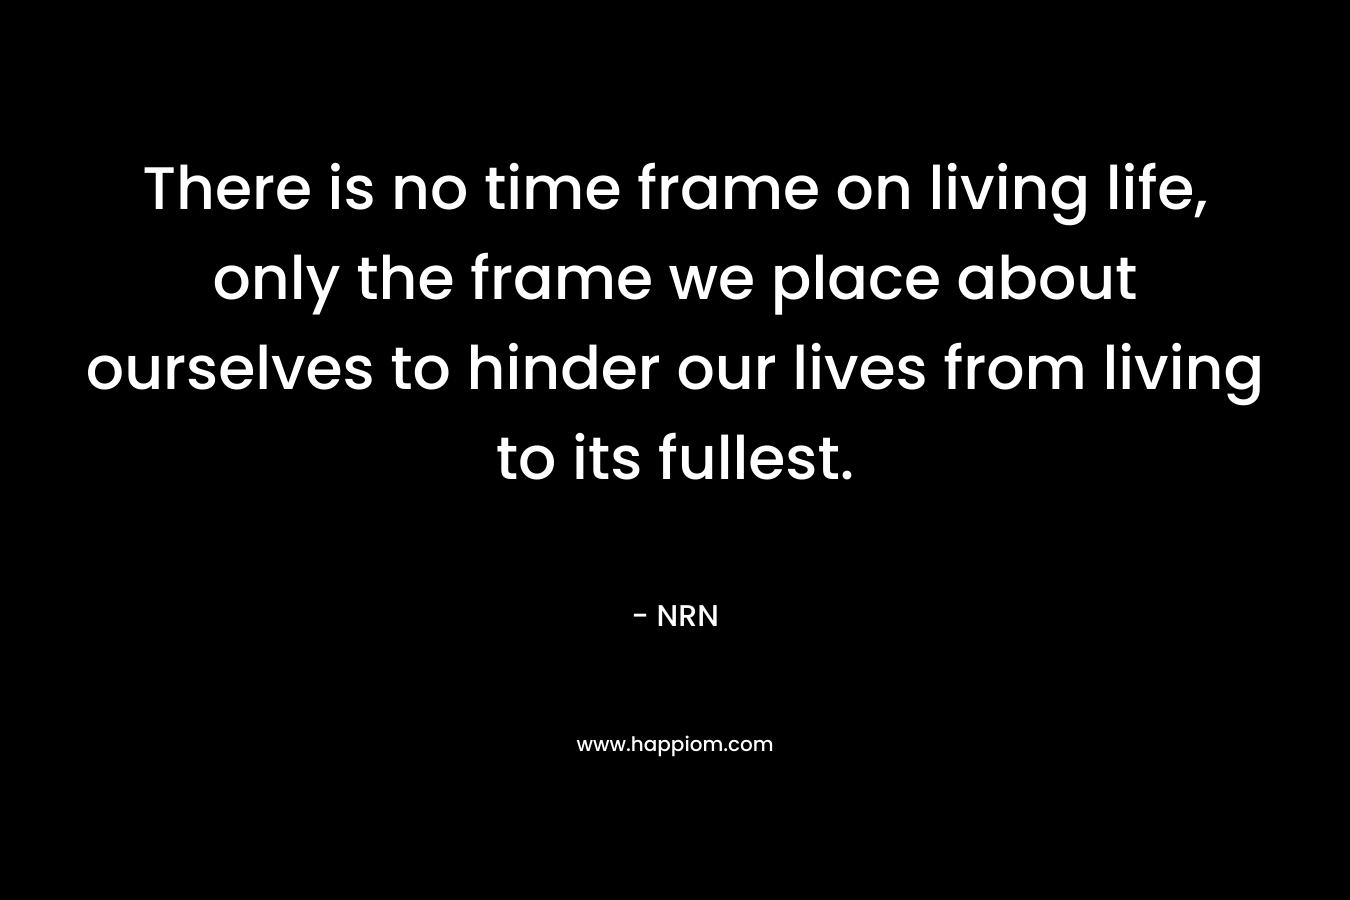 There is no time frame on living life, only the frame we place about ourselves to hinder our lives from living to its fullest. – NRN